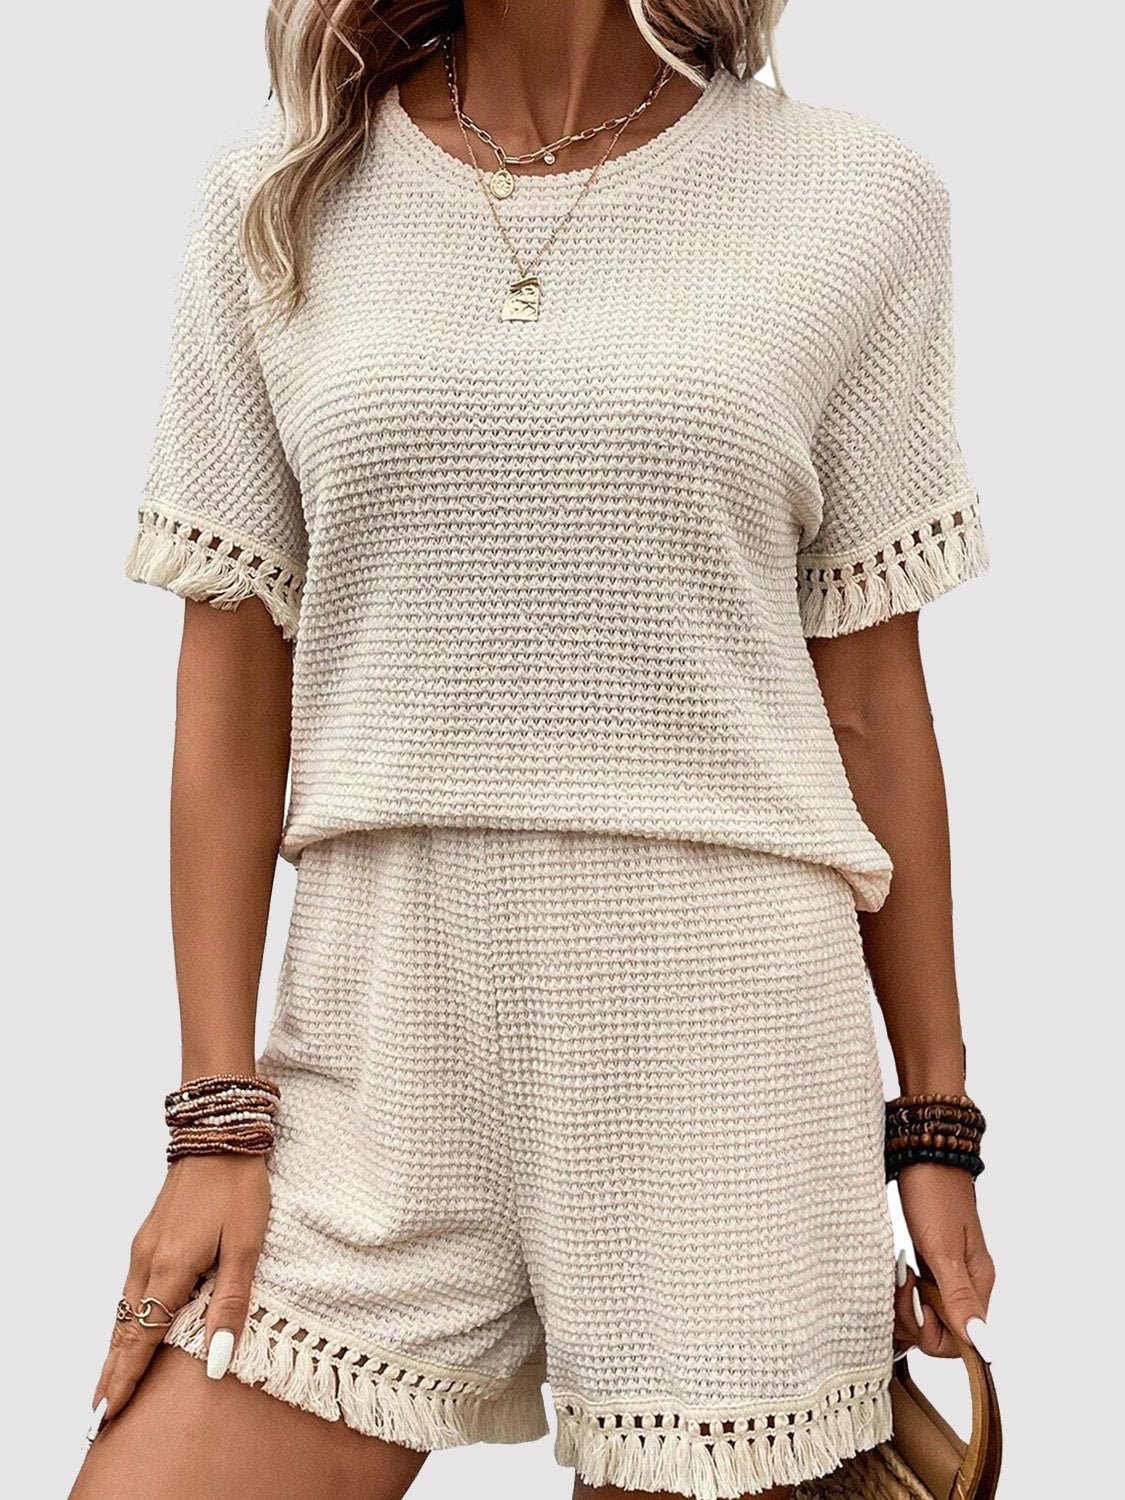 Tassel Round Neck Top and Shorts Set - OMG! Rose